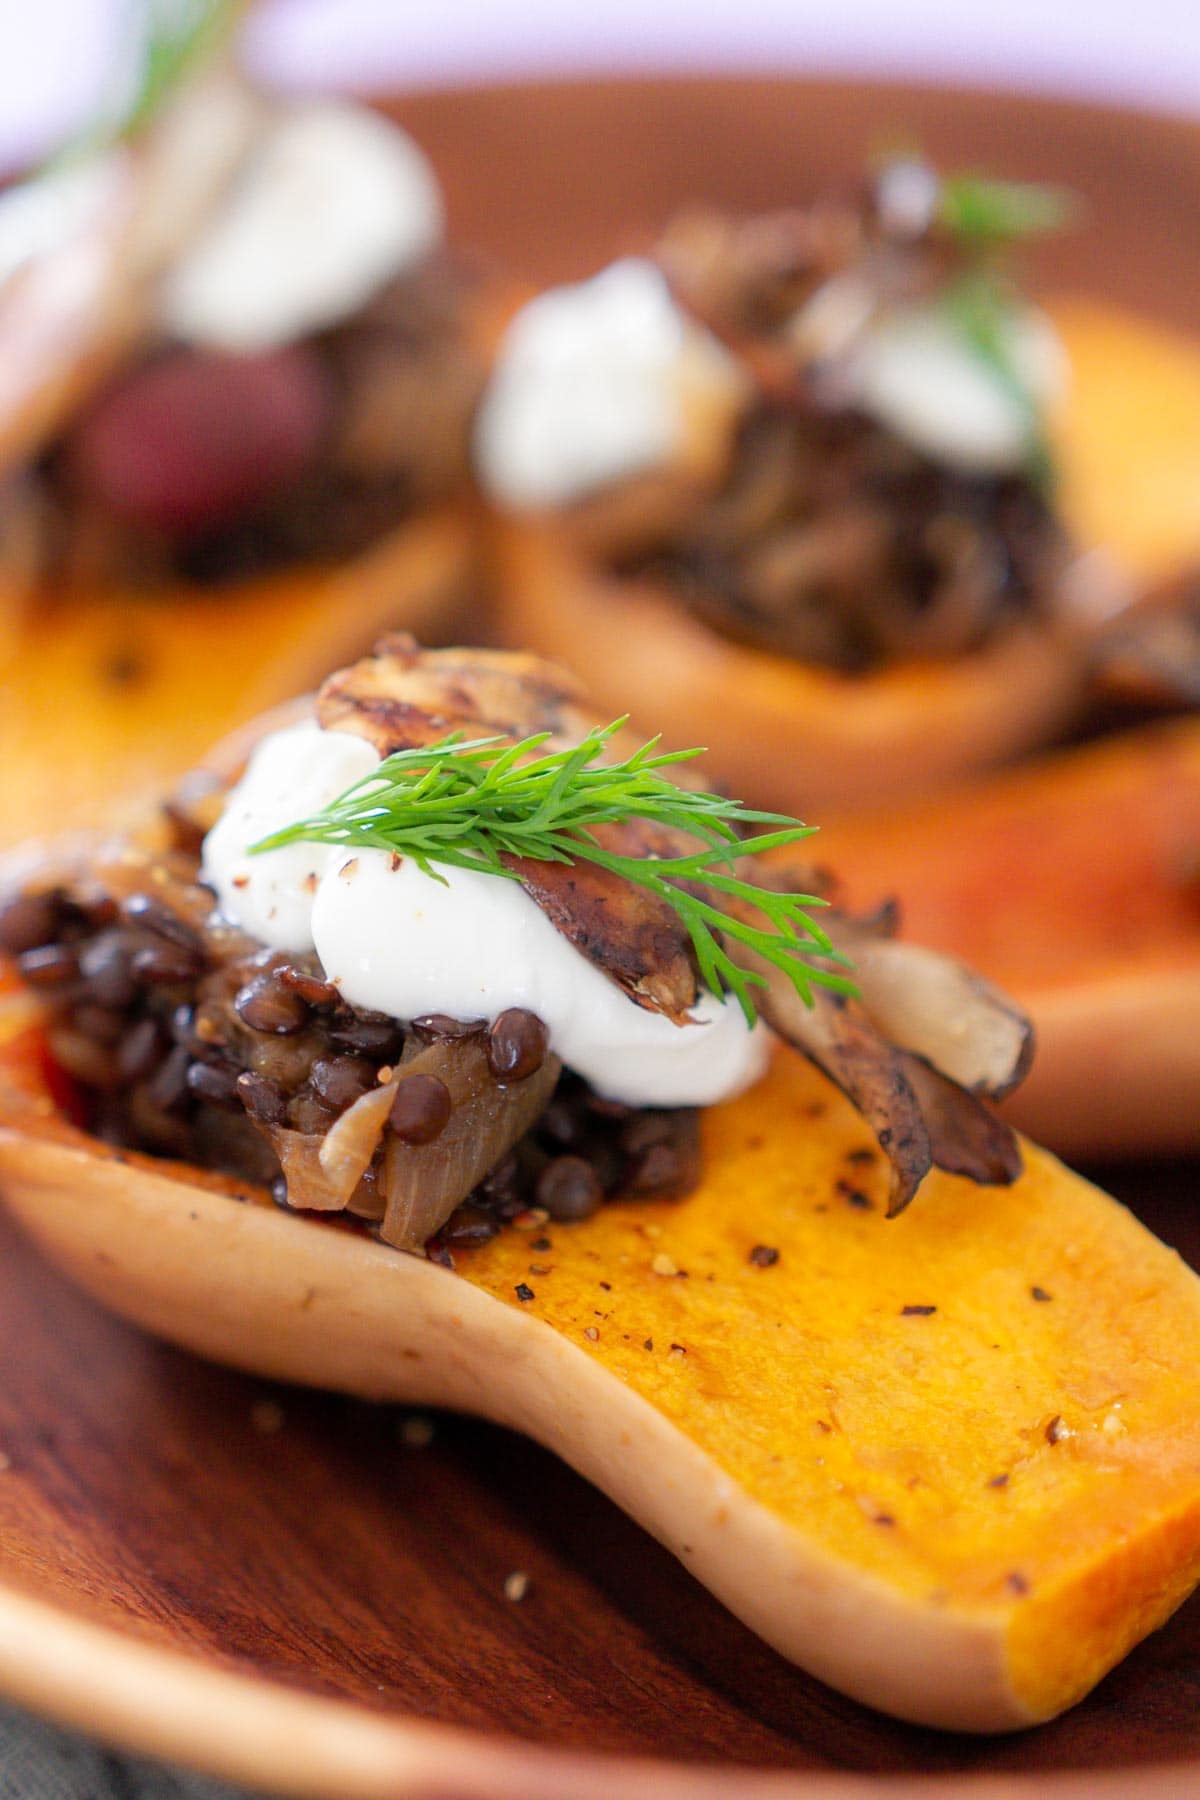 A close-up photo of roasted honeynut squash filled with black lentil stuffing, yogurt, dill, and seared maitake mushroom on a wood plate.